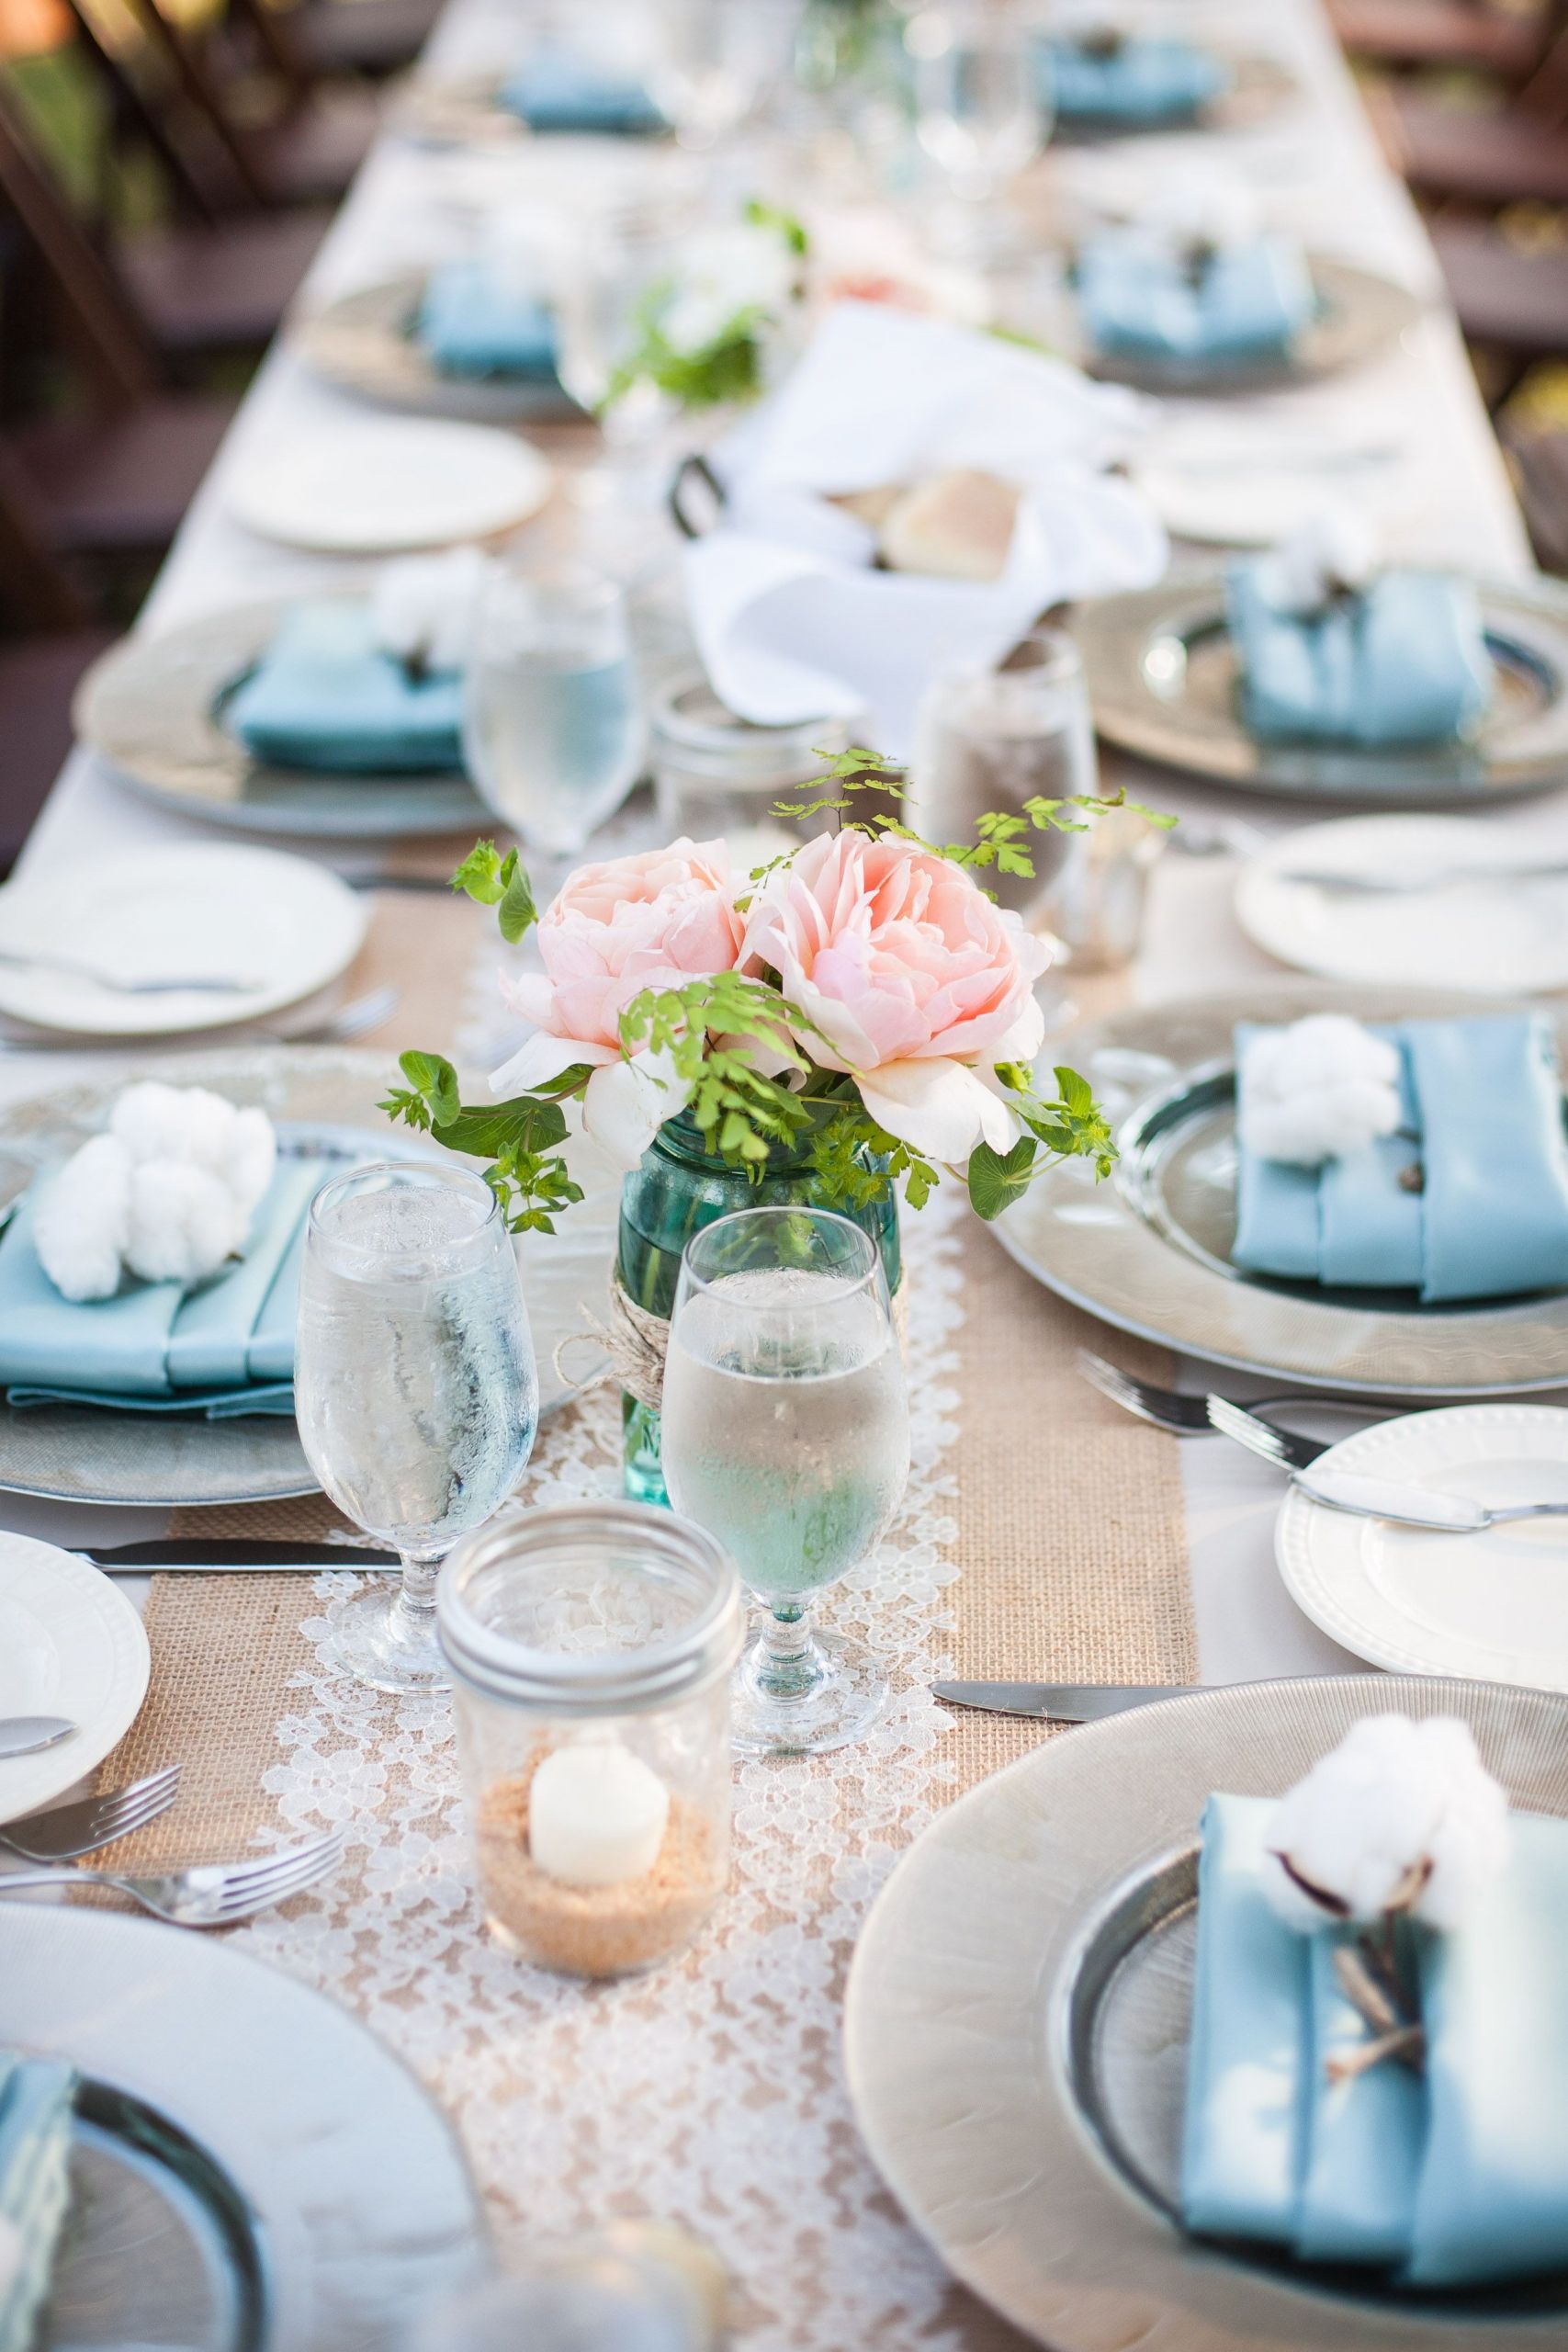 Baby Blue Wedding Decor
 Burlap and Lace Wedding and Party Ideas